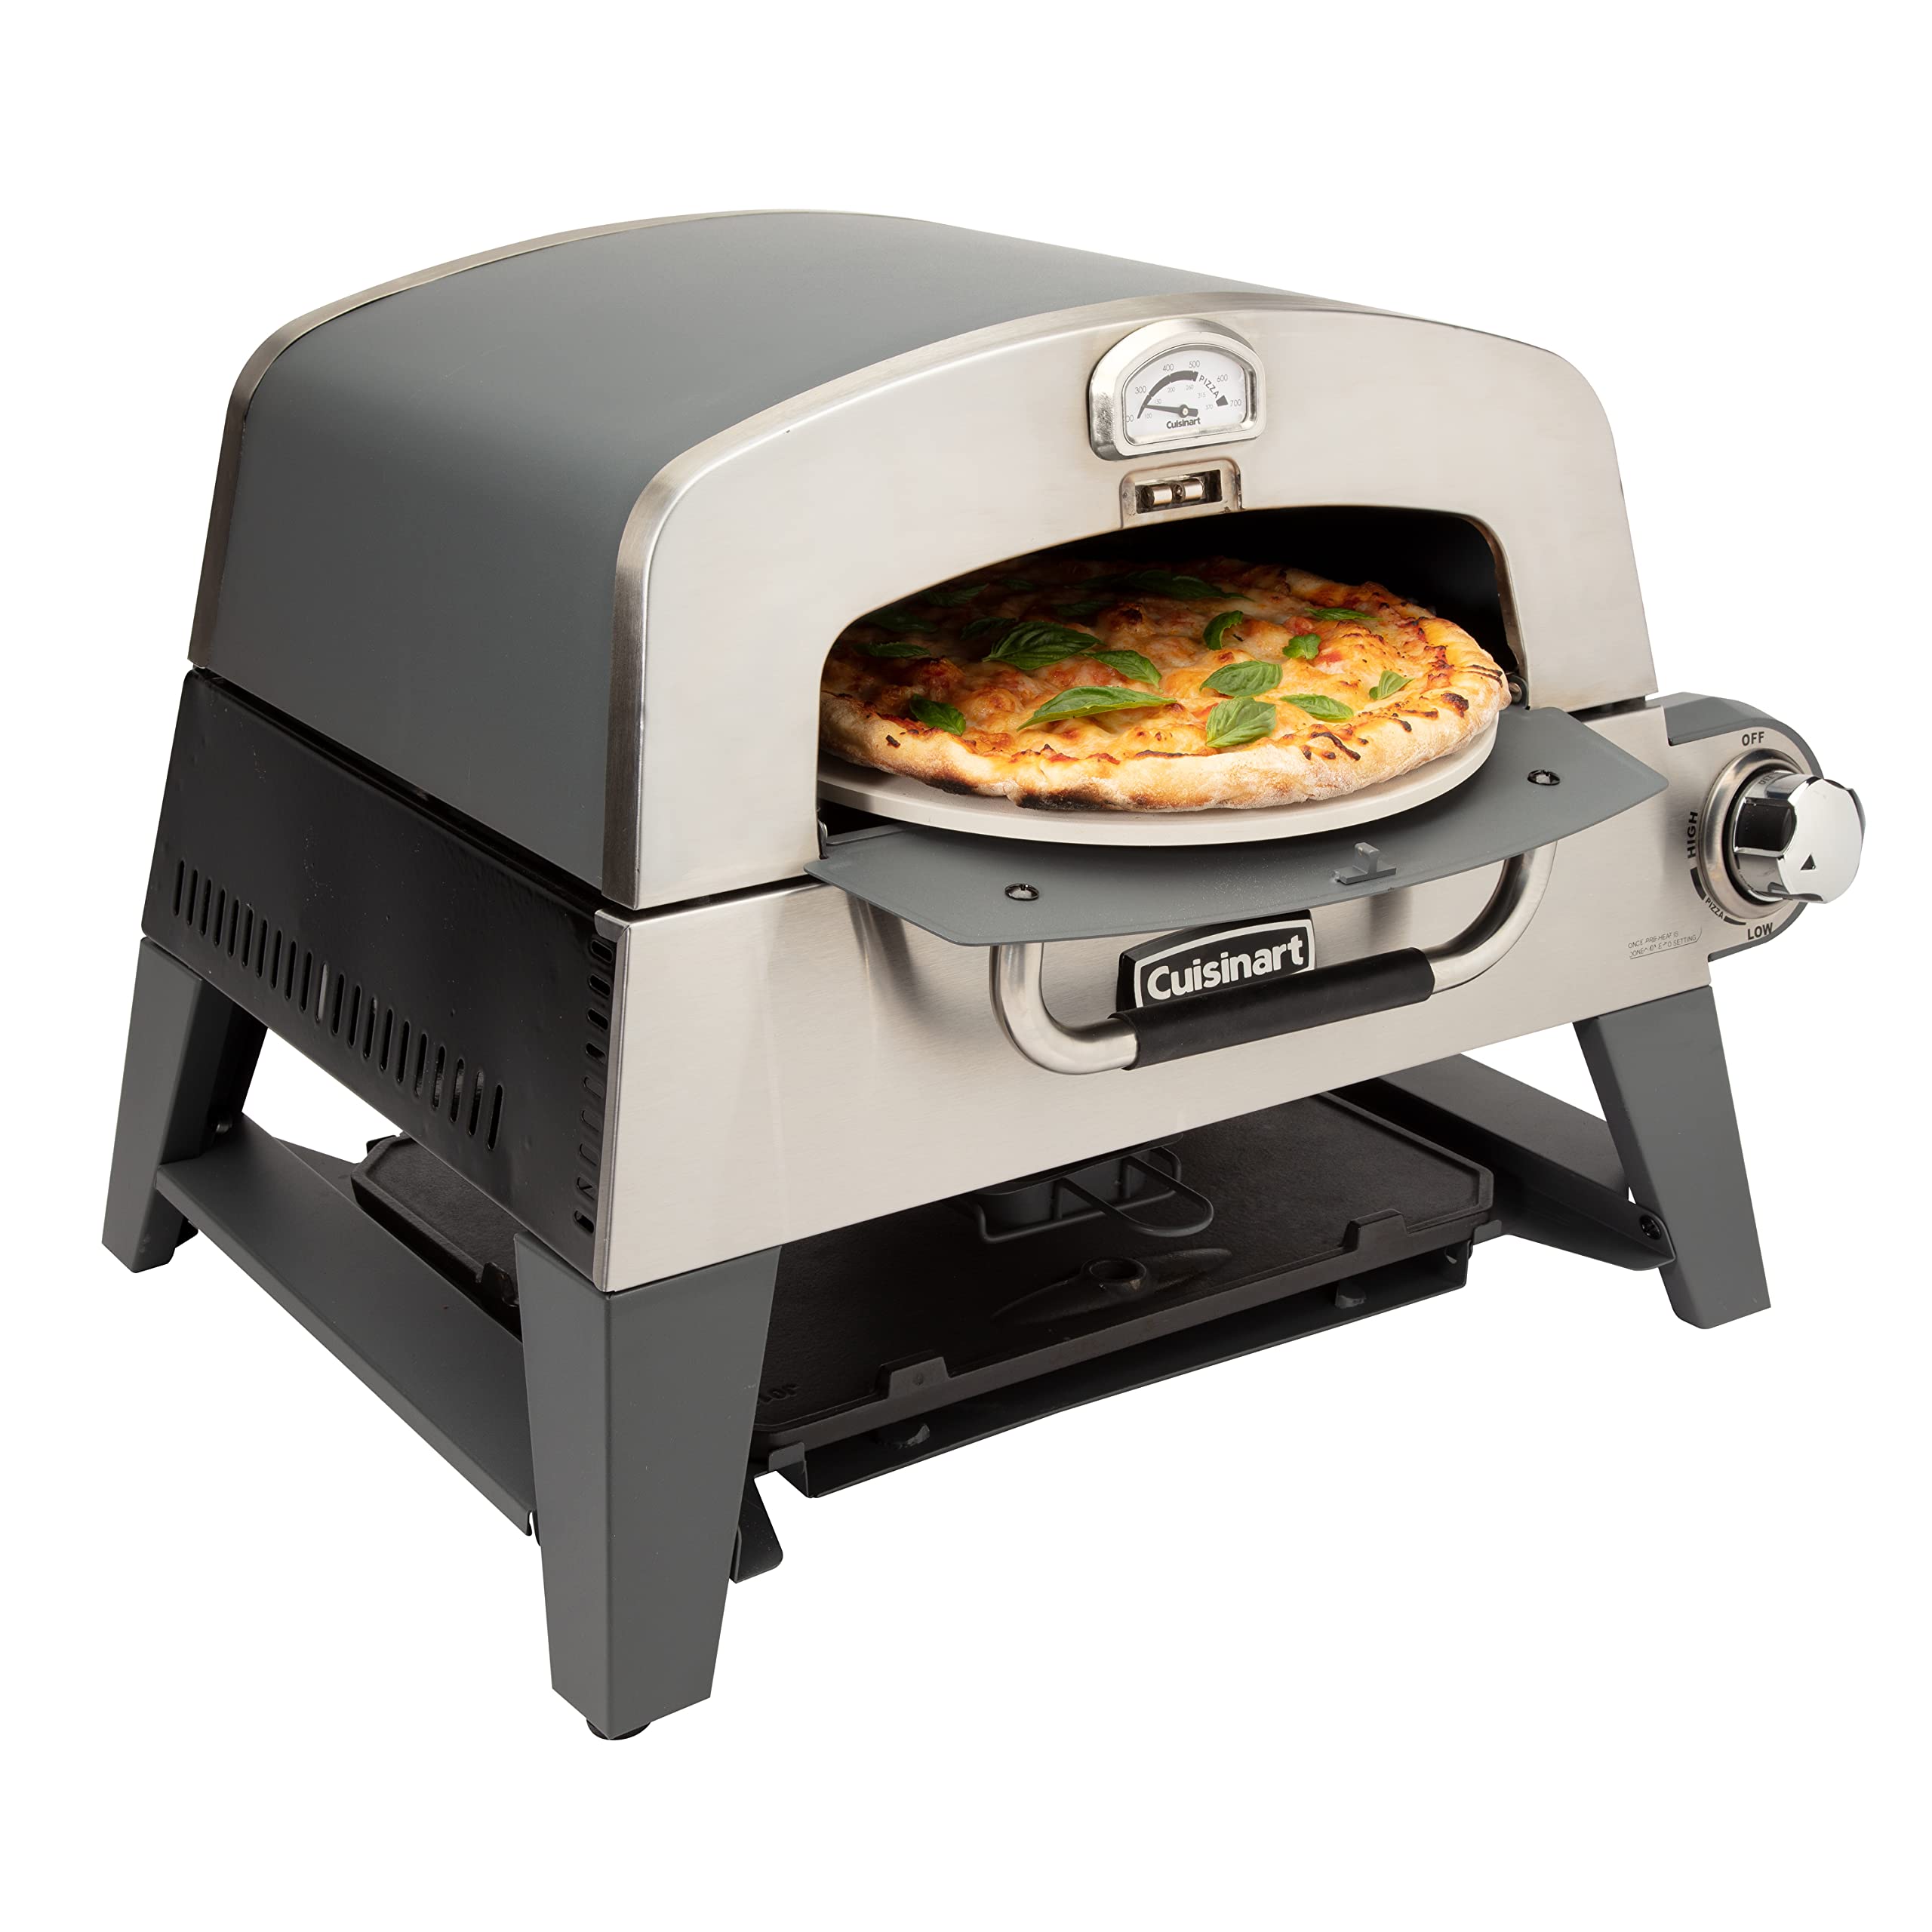 Cuisinart CGG-403 3-in-1 Pizza Oven Plus, Griddle, and ...